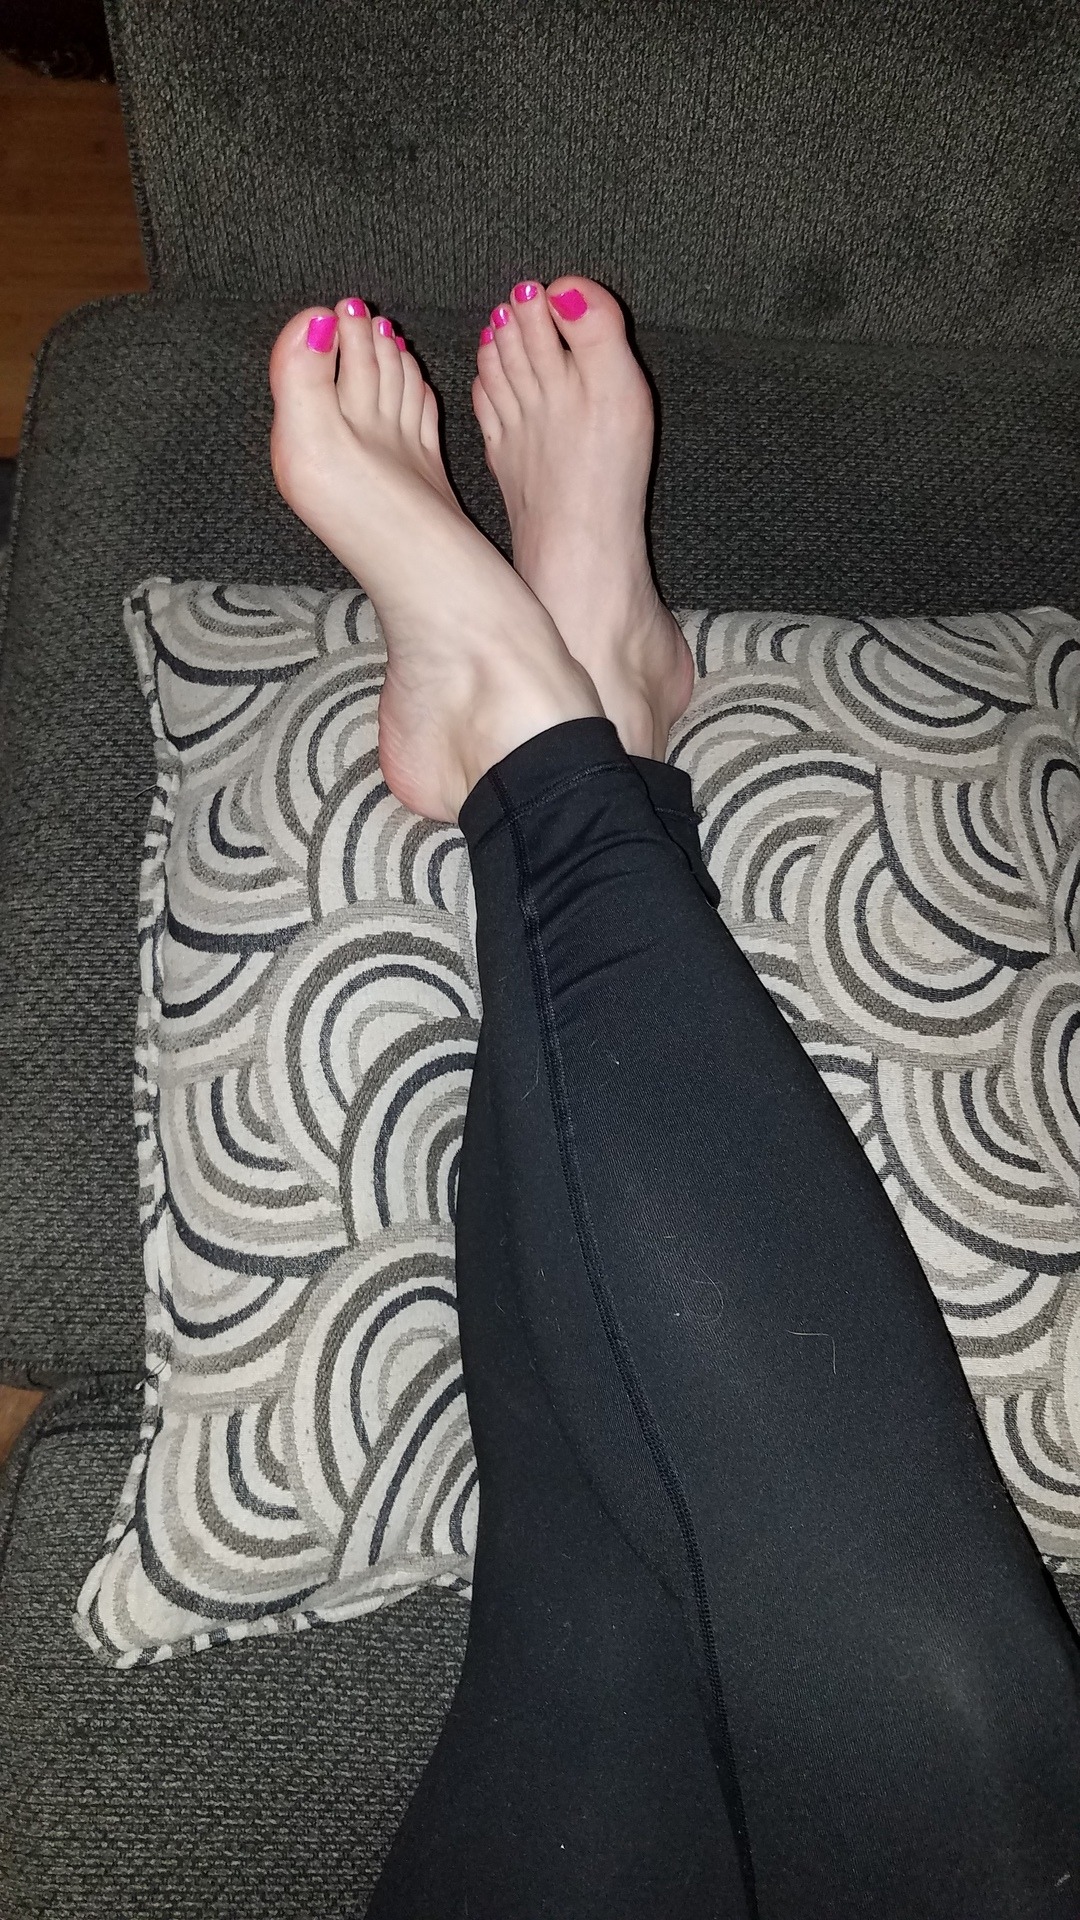 Candid,homemade and all original pics — My pretty wifes sexy feet freshly painted.please...